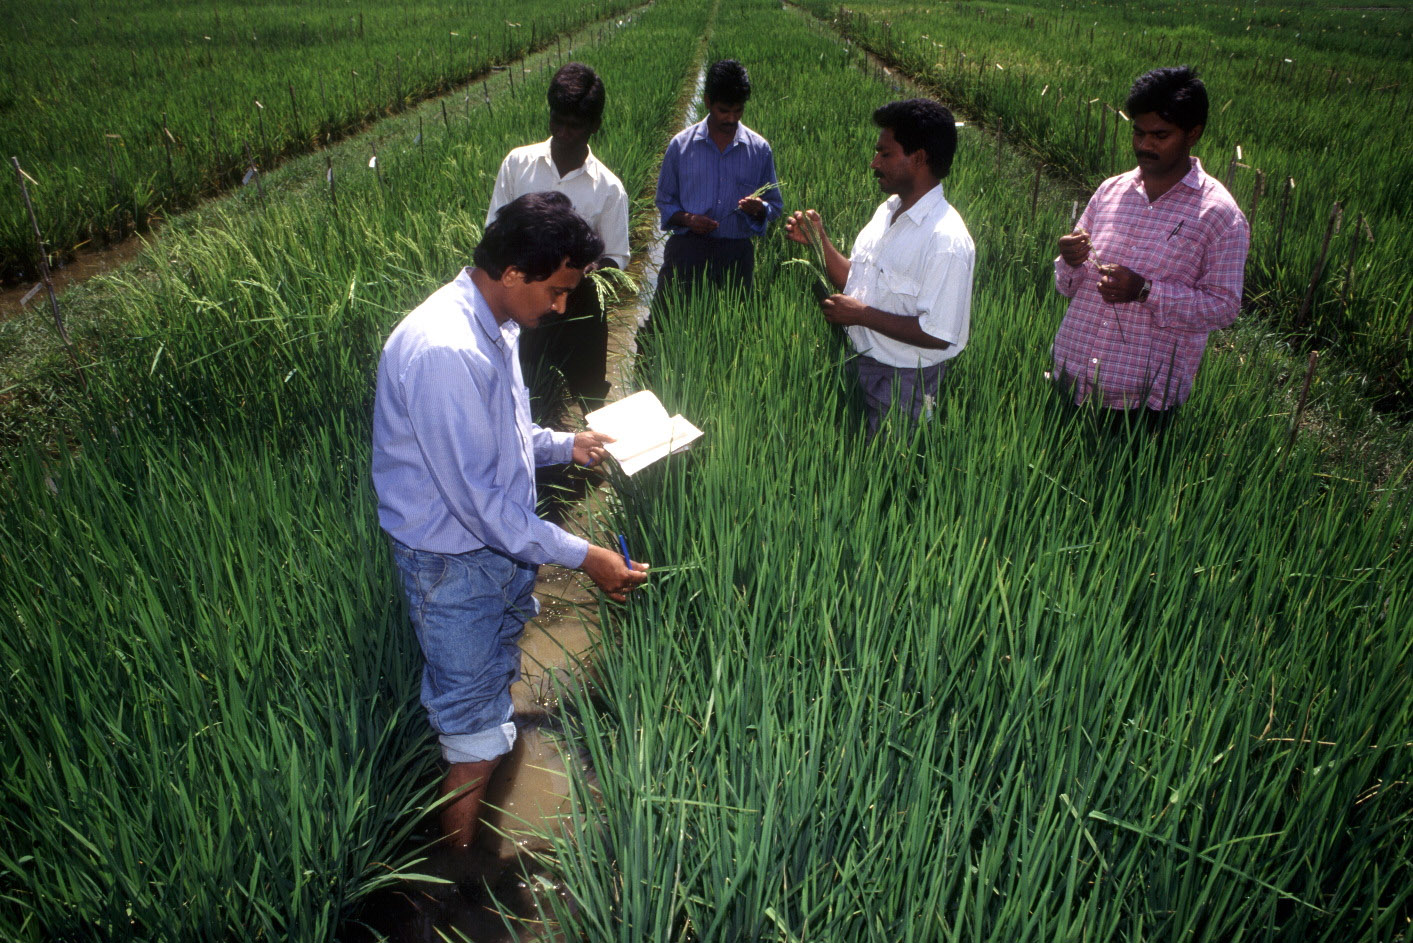 Open Access to Agricultural Knowledge for Inclusive Growth